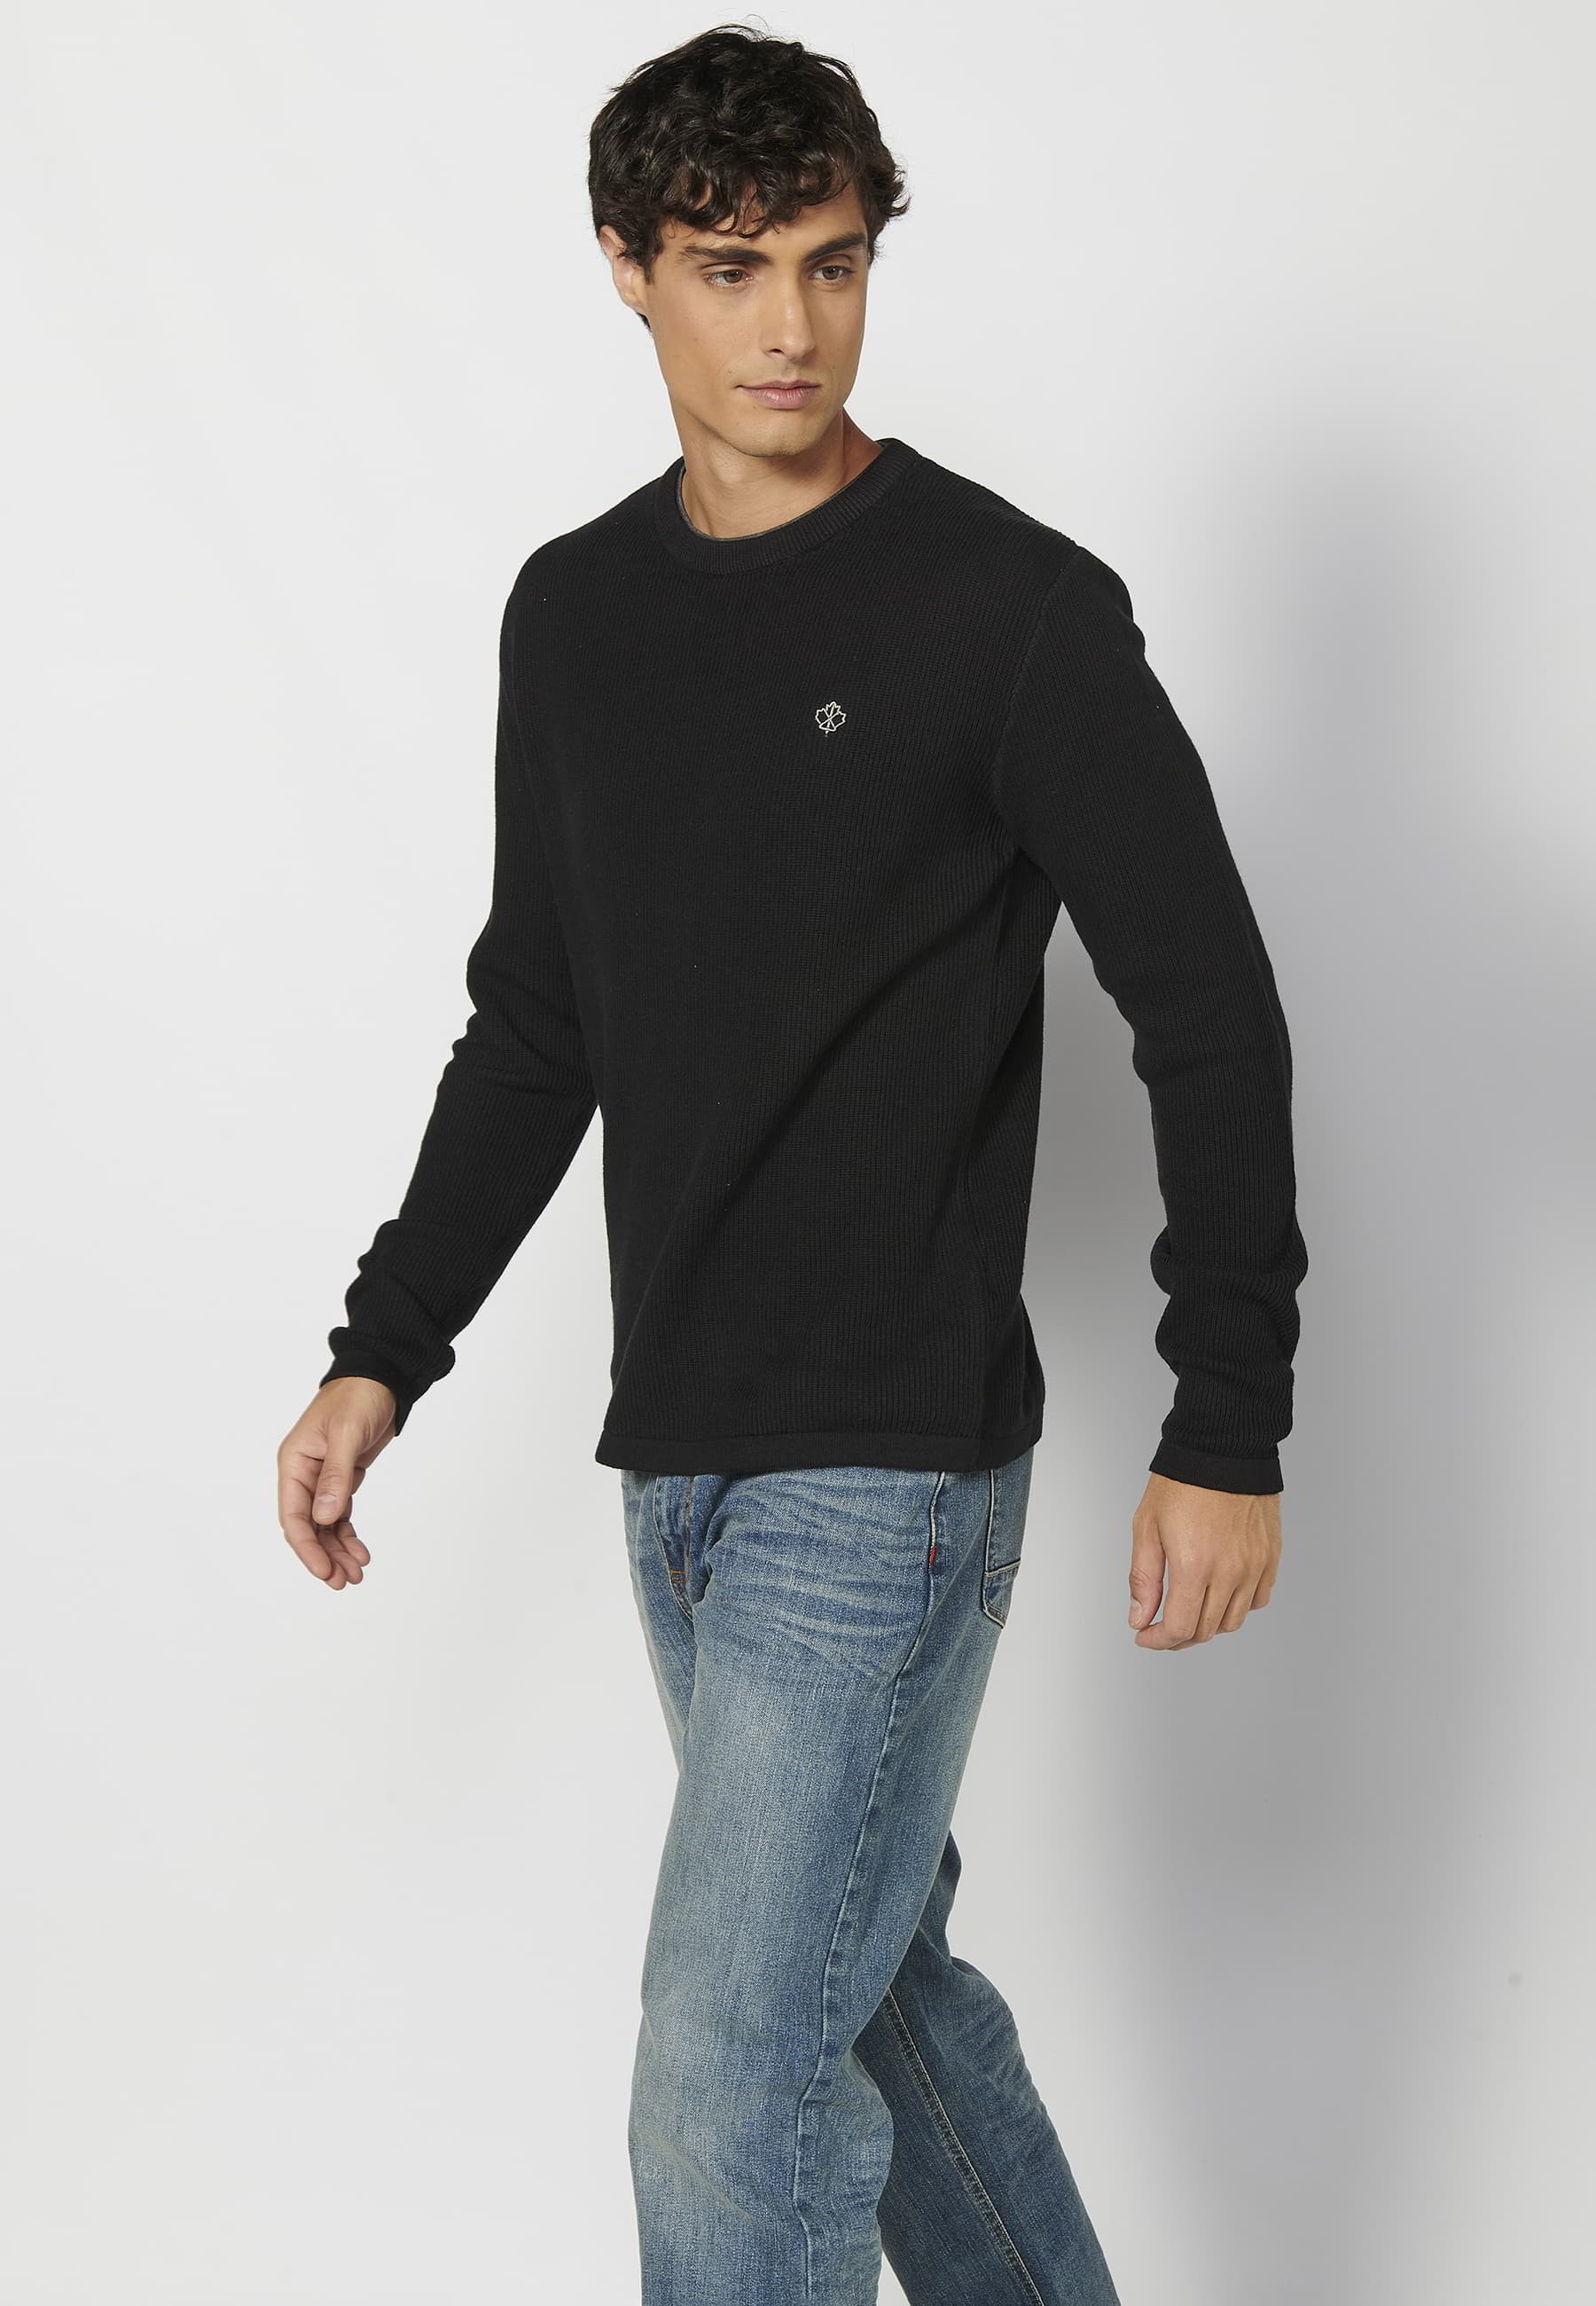 Long sleeve cotton tricot sweater with embroidered detail in black for Men